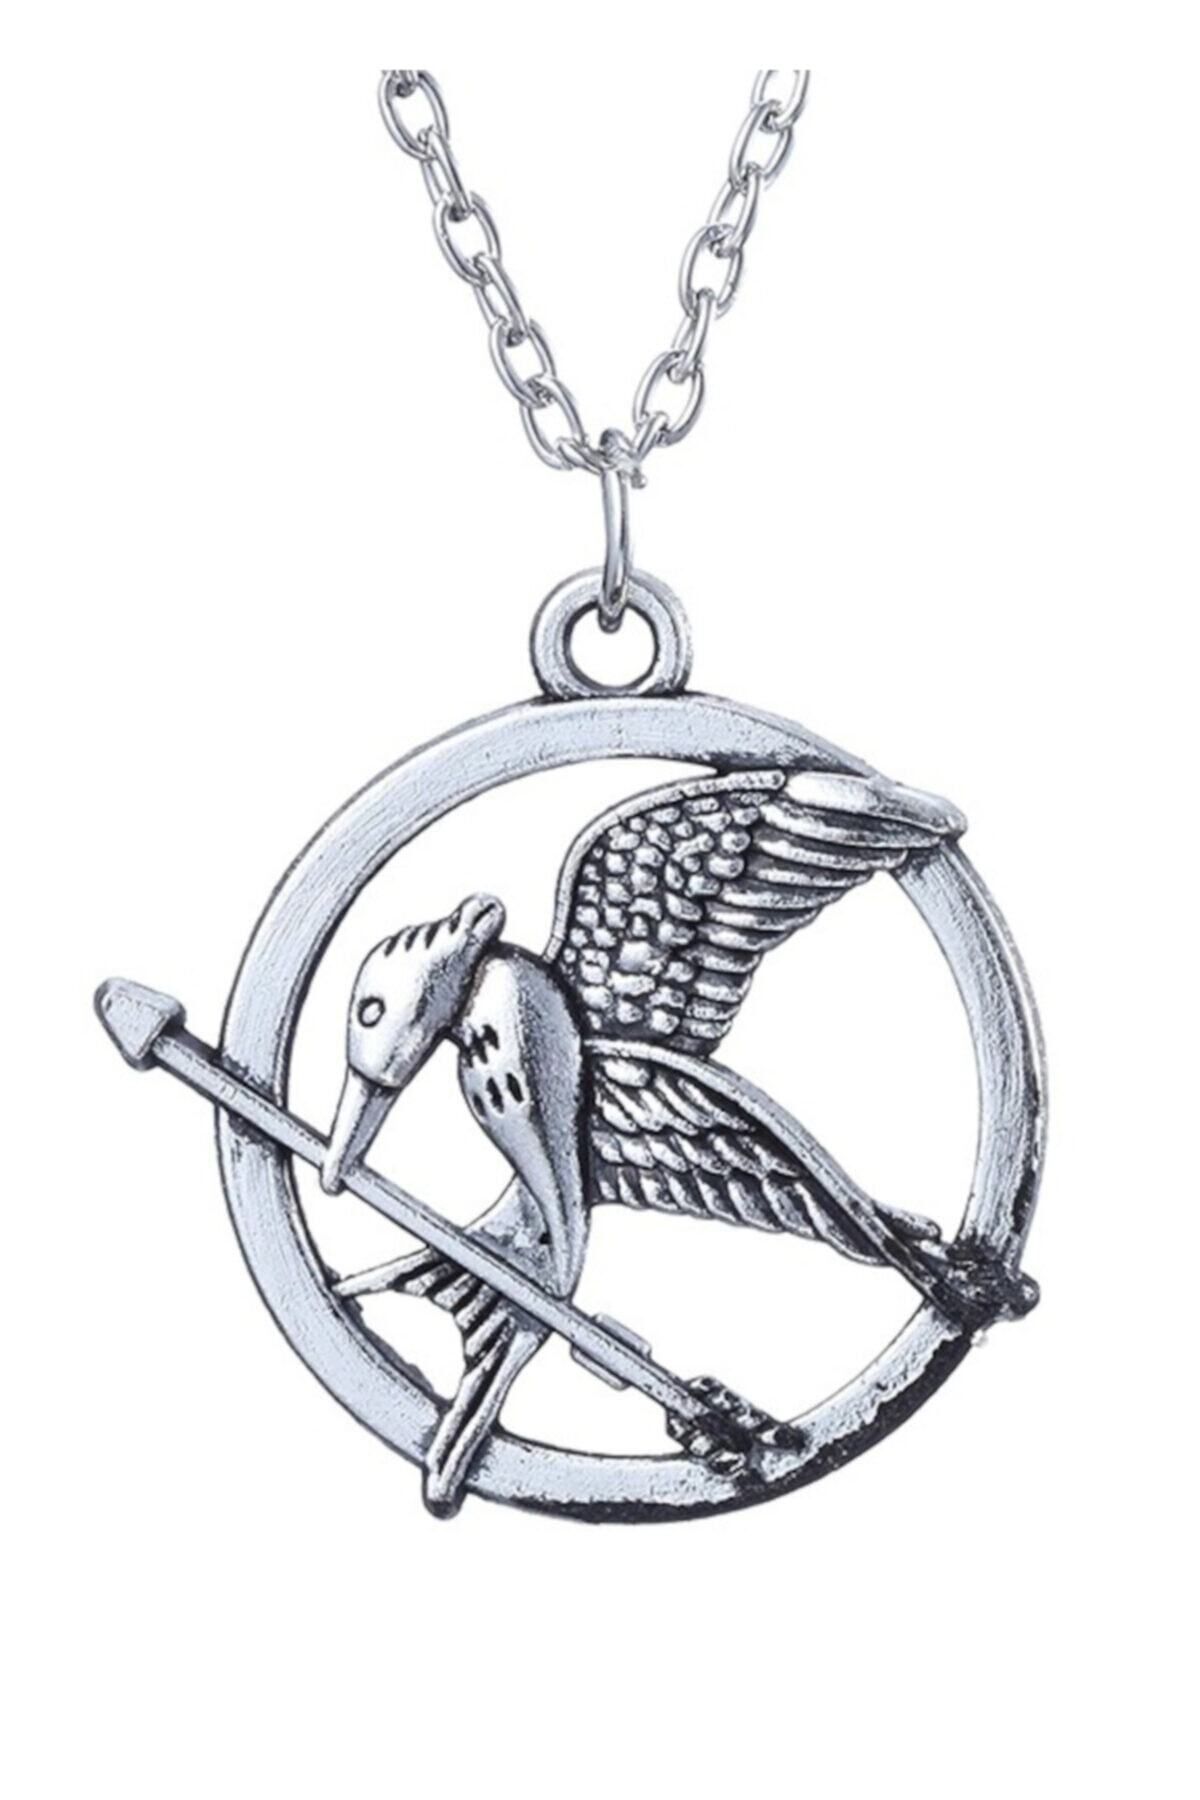 ReplicaPropStore - THE HUNGER GAMES FINNICK NECKLACE